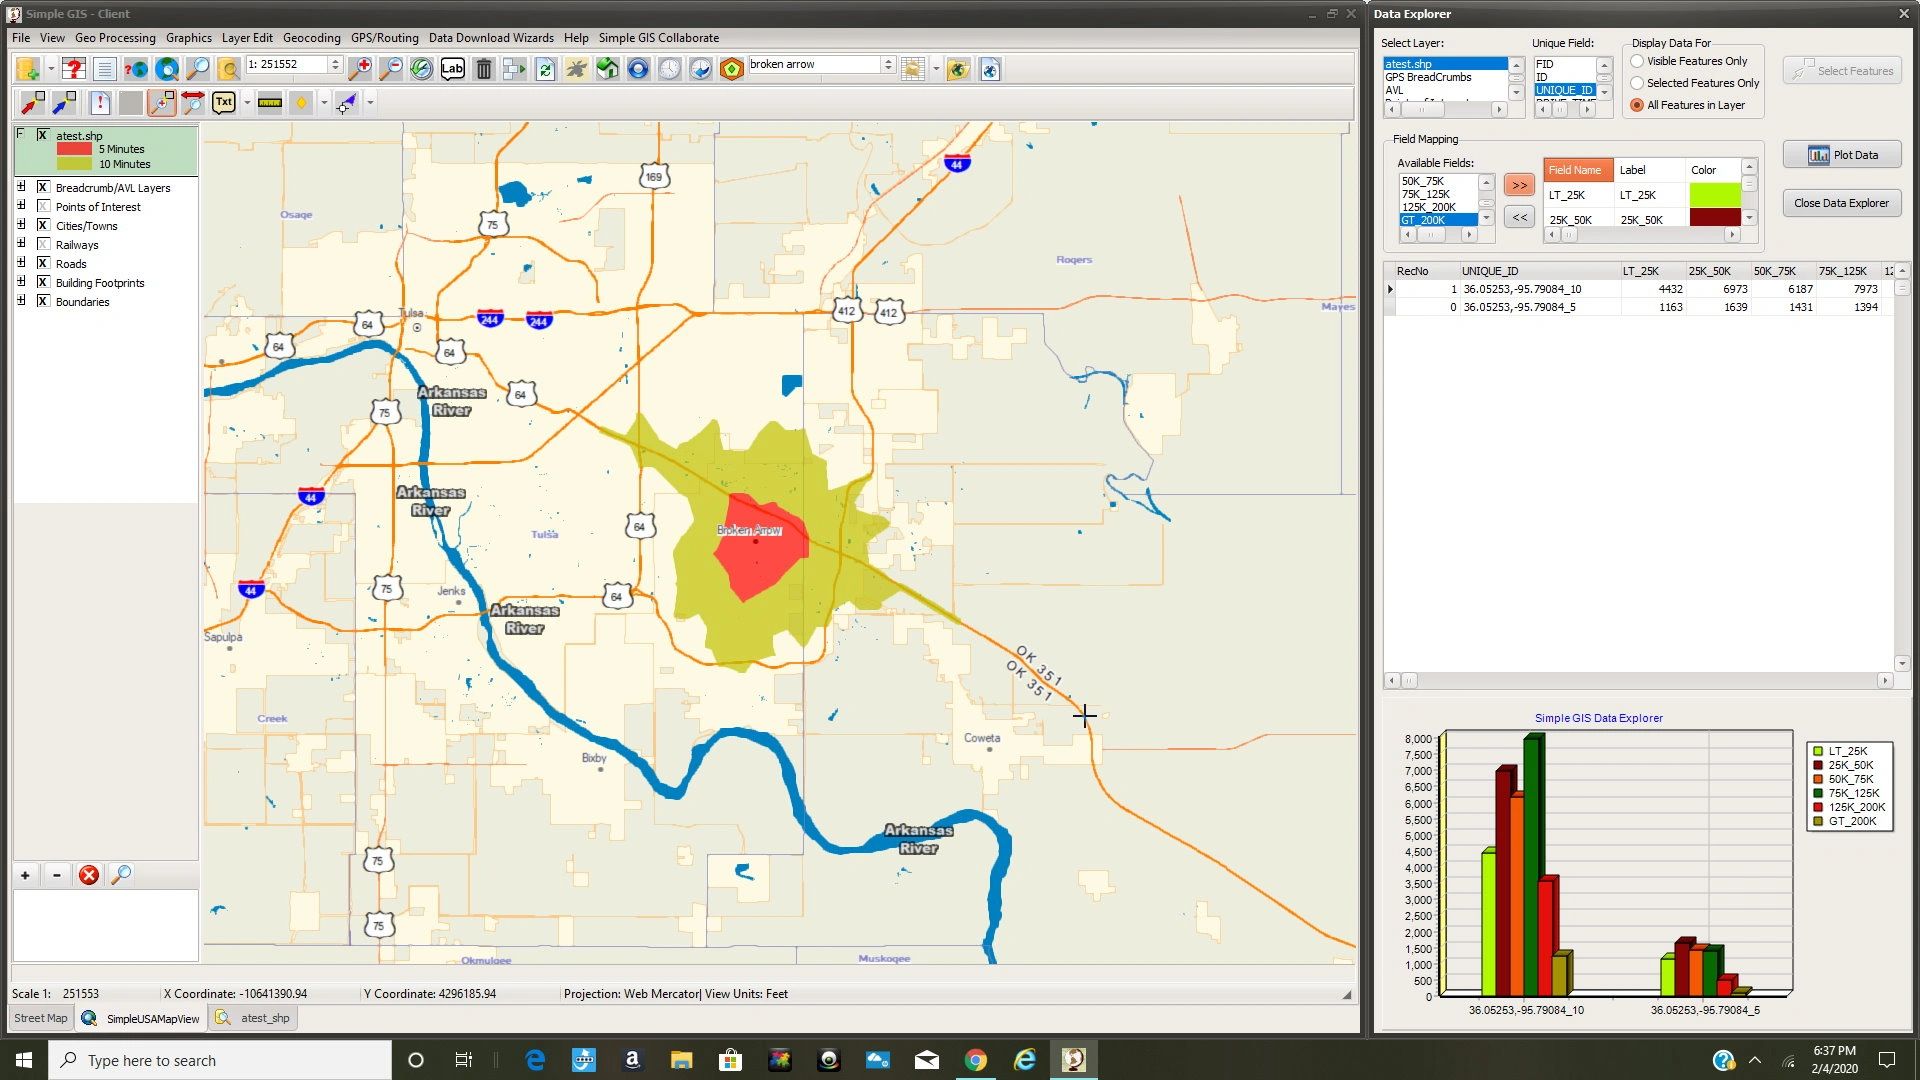 Using the Data Explorer Tool in Simple GIS Client Software